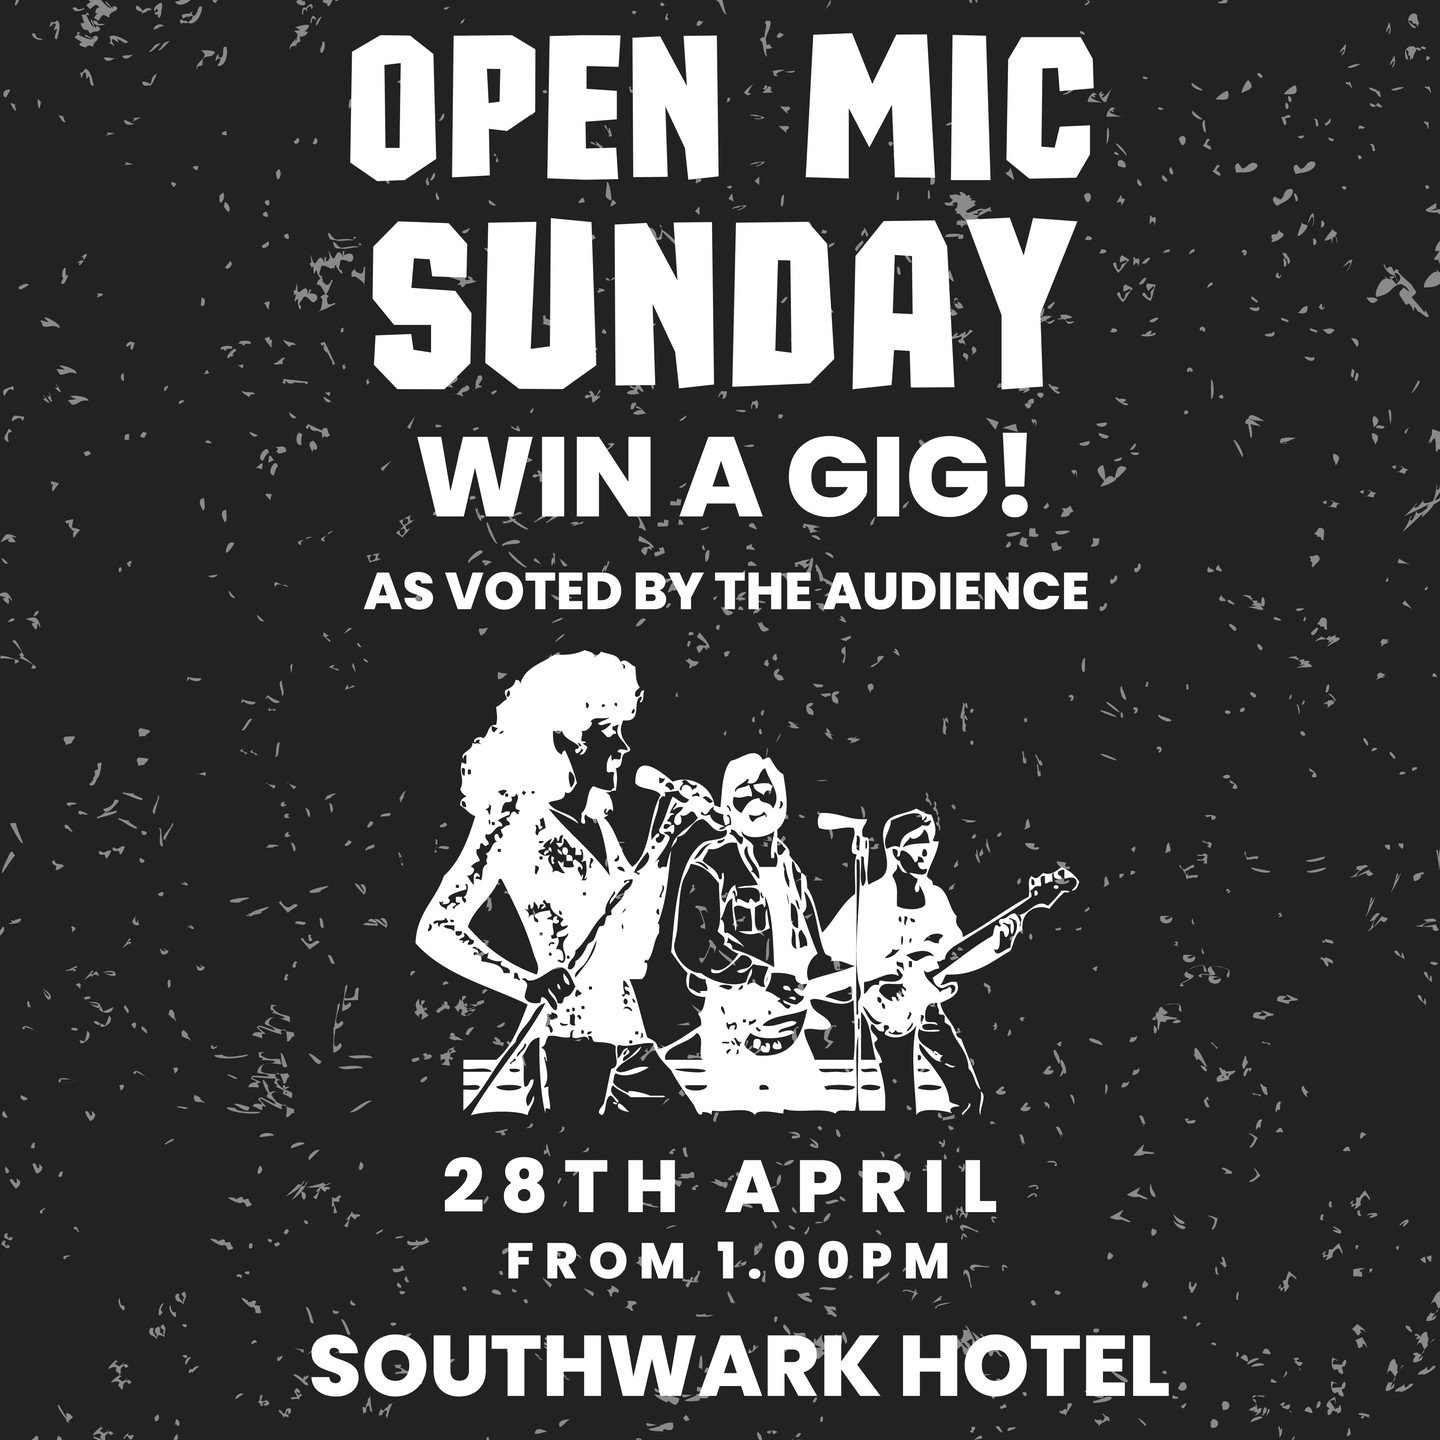 T H I S S U N D A Y 28 A P R I L
Performing or enjoying the talent, this will be a great afternoon. We would love you to join us, get involved, vote, have a beer or two. Please feel free to share.

#southwarkhotel #southwarkpub #livemusic #acousticmu